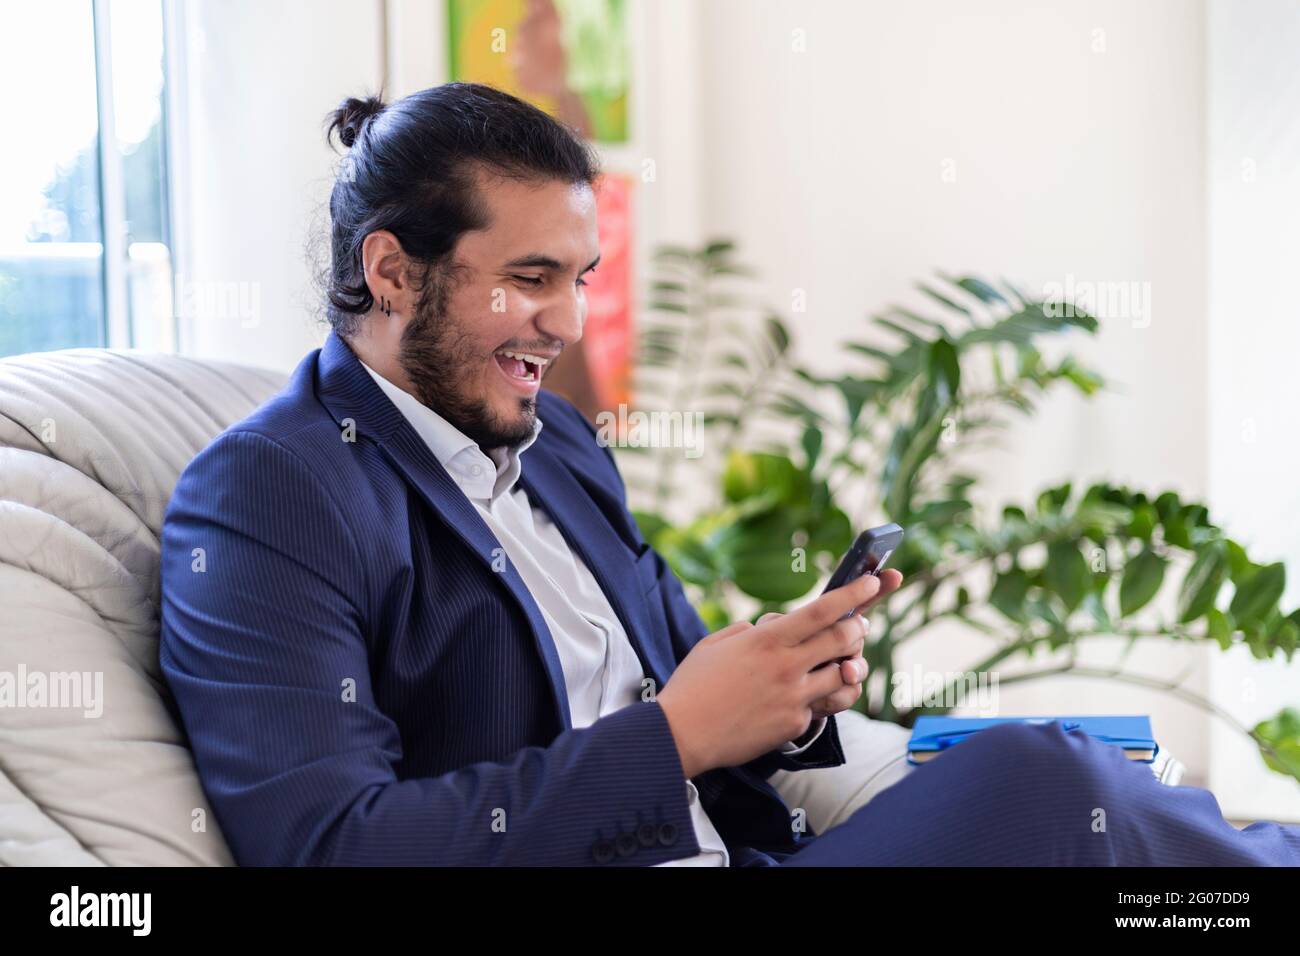 young latino man with long hair and piercings dressed in suit smiling while  texting on smart phone in home office. Home Office concept Stock Photo -  Alamy